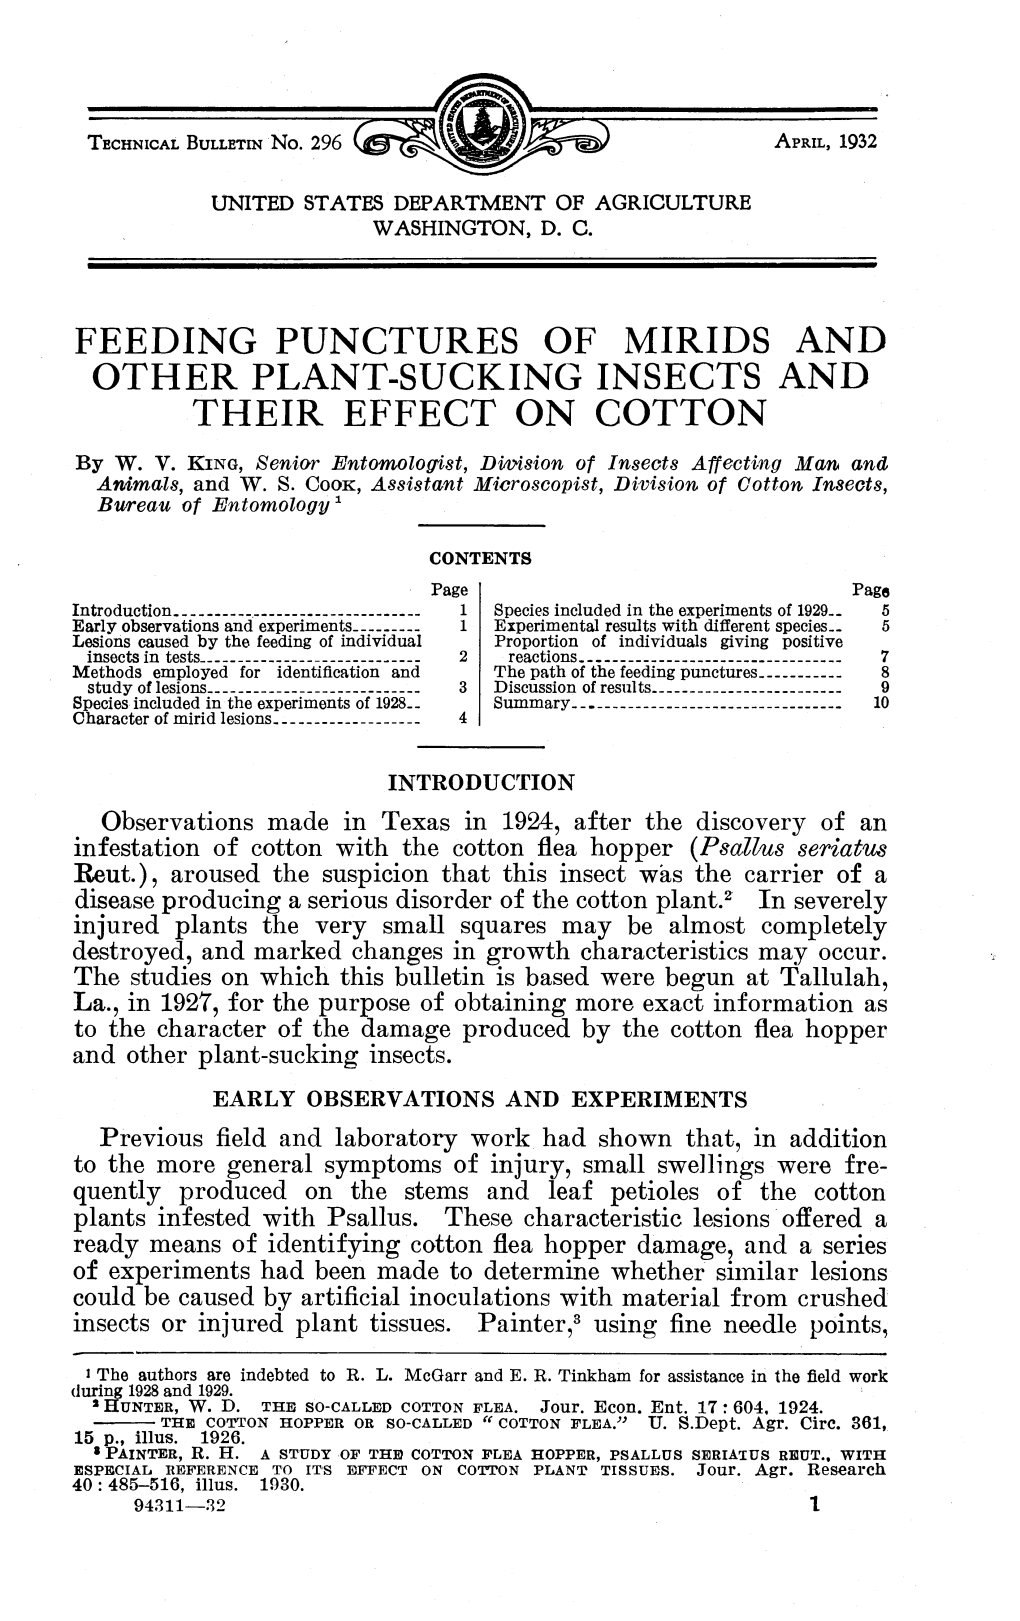 Feeding Punctures of Mirids and Other Plant-Sucking Insects and Their Effect on Cotton